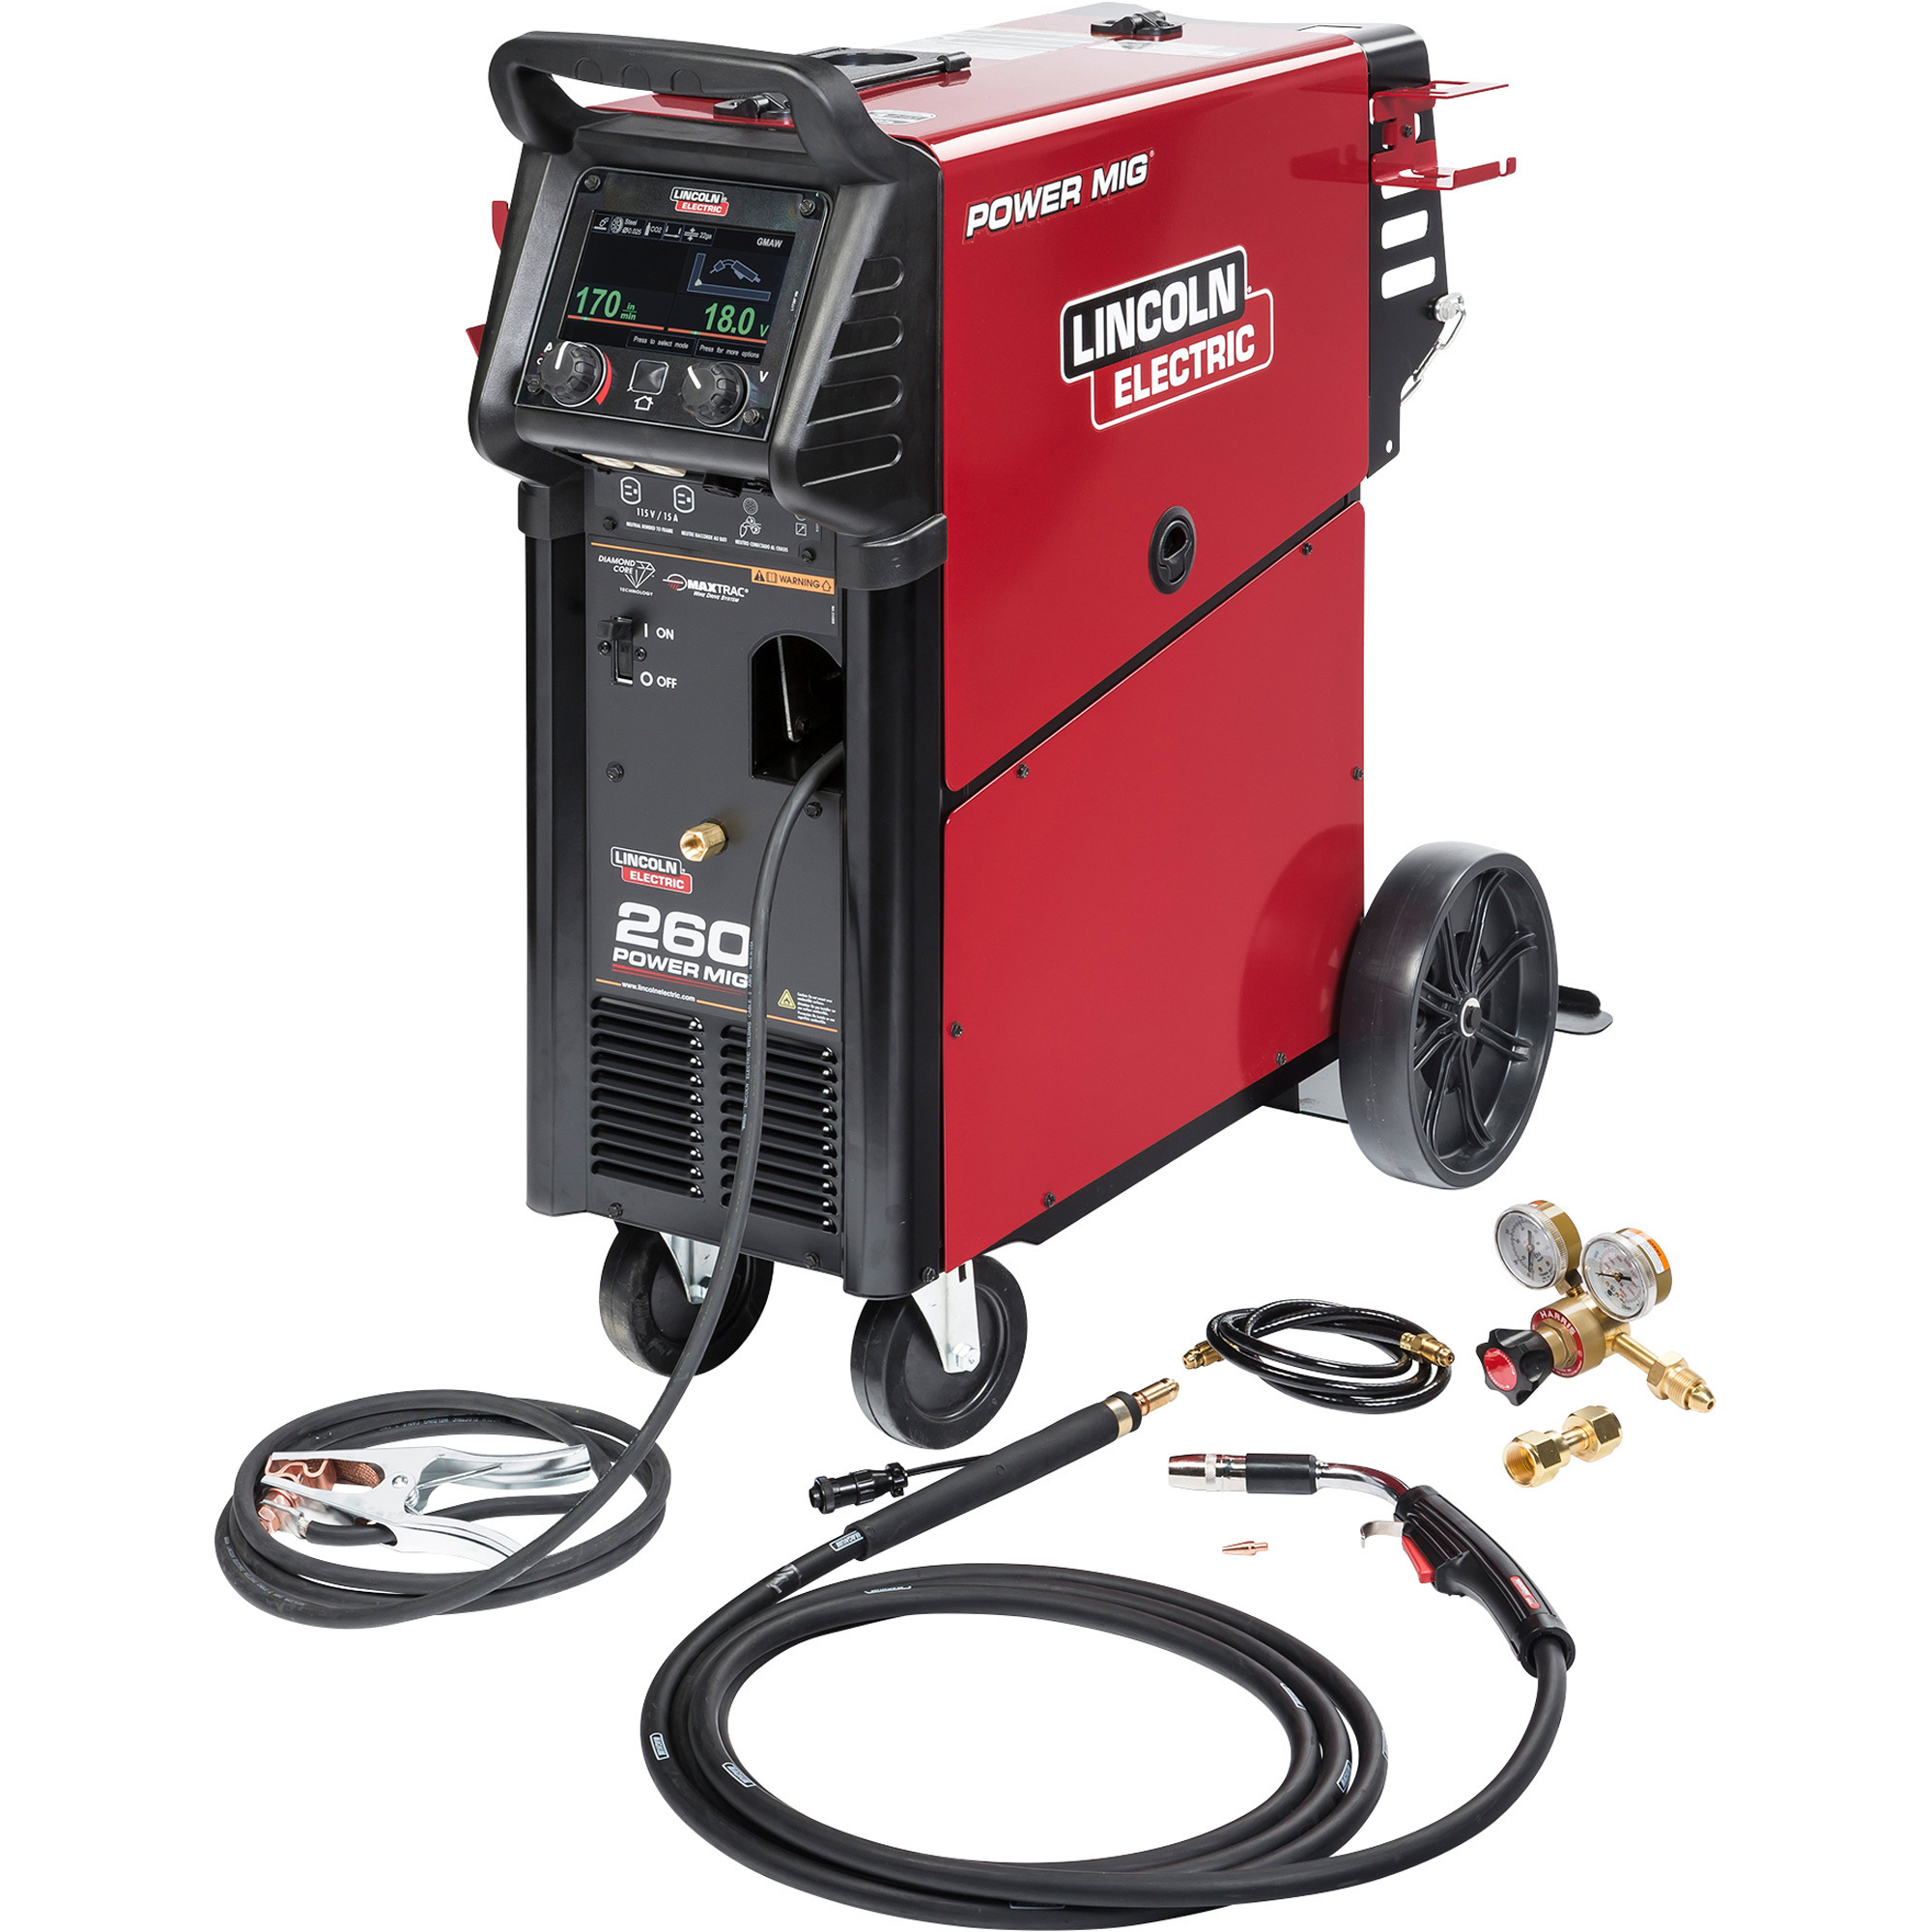 Lincoln Electric Power MIG 260 Flux-Core/MIG Welder with Cart, 208/230/460/575V, 30-300 Amp Output, Model K3520-1